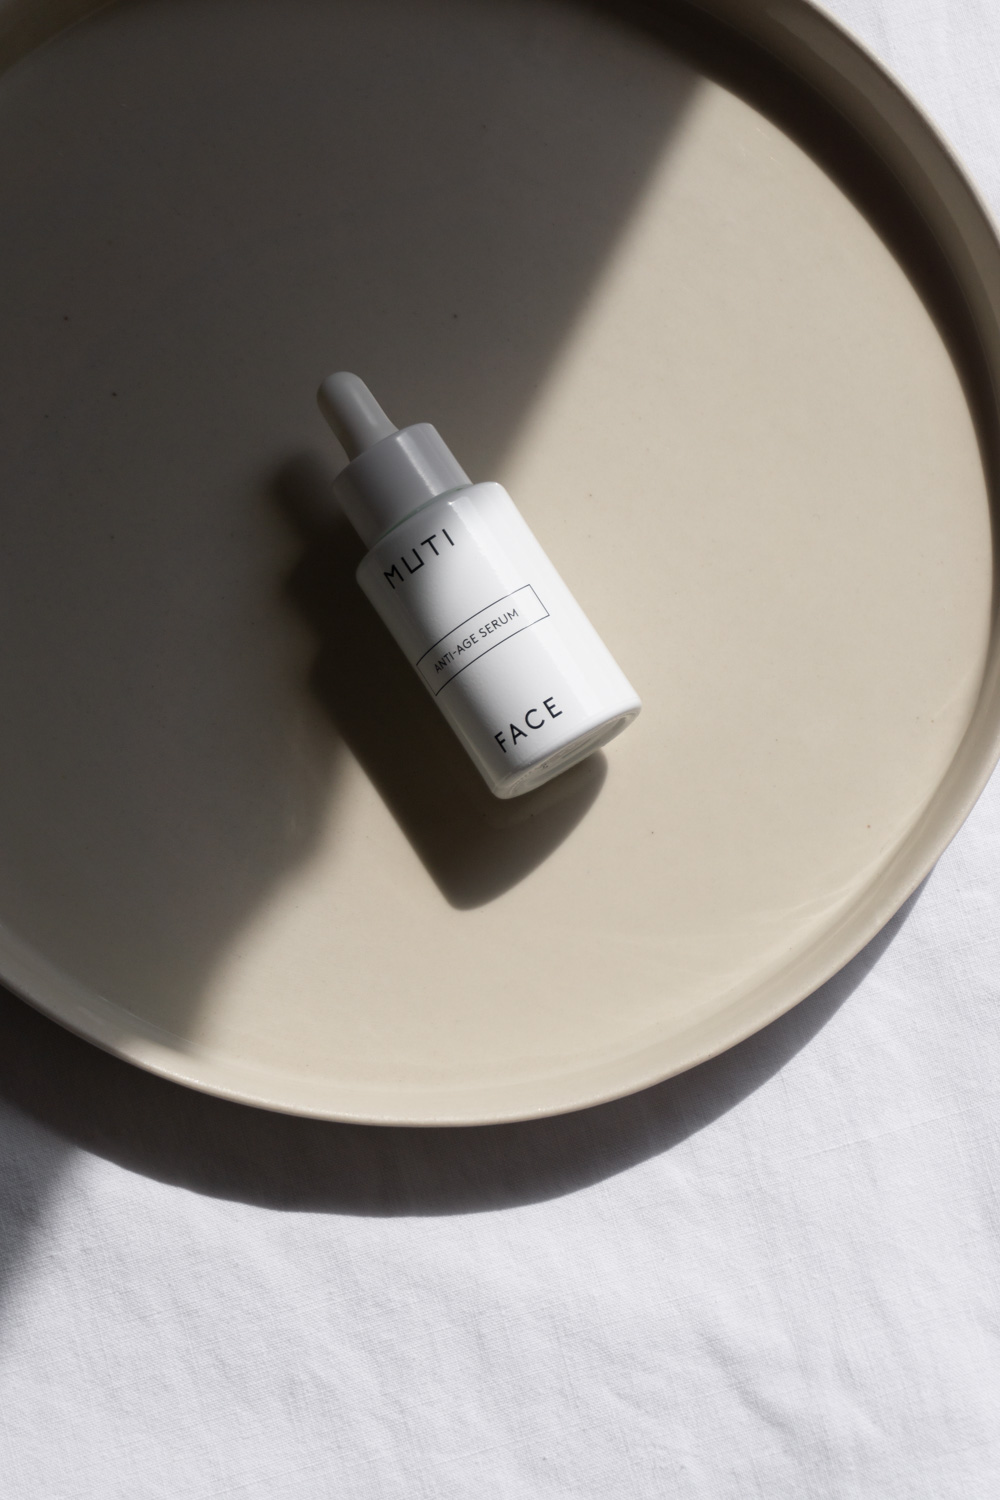 MUTI Skincare - Clean Facial Cleanser, Minimalist Everyday Skincare Routine | Natural Beauty, Packaging Design, Product Photography, Light & Shadows, Shadow Play - Slow Living & Self Care | RG Daily Blog